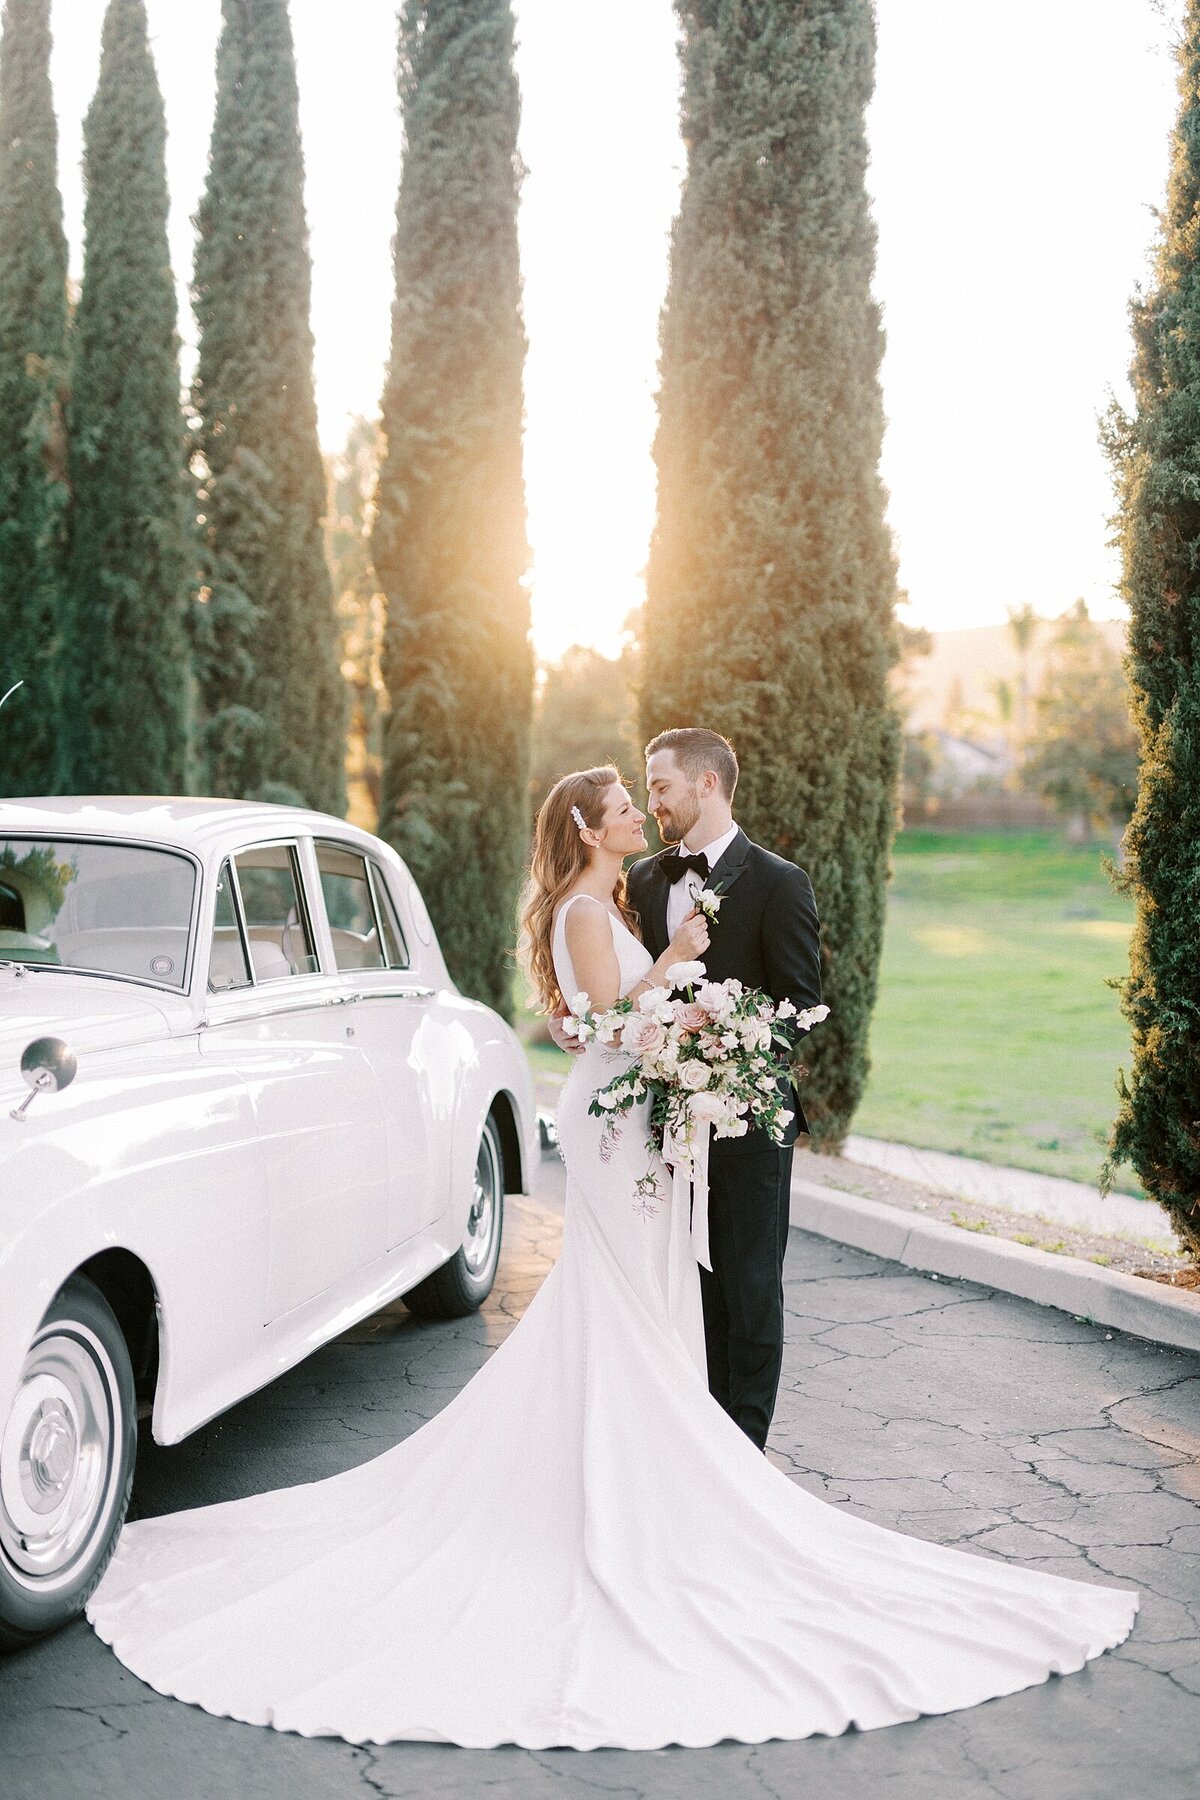 Blush black tie wedding at Twin Oaks Golf Course & Carmel Mountain Ranch Estate by Lisa Riley Photography based in San Diego, California.